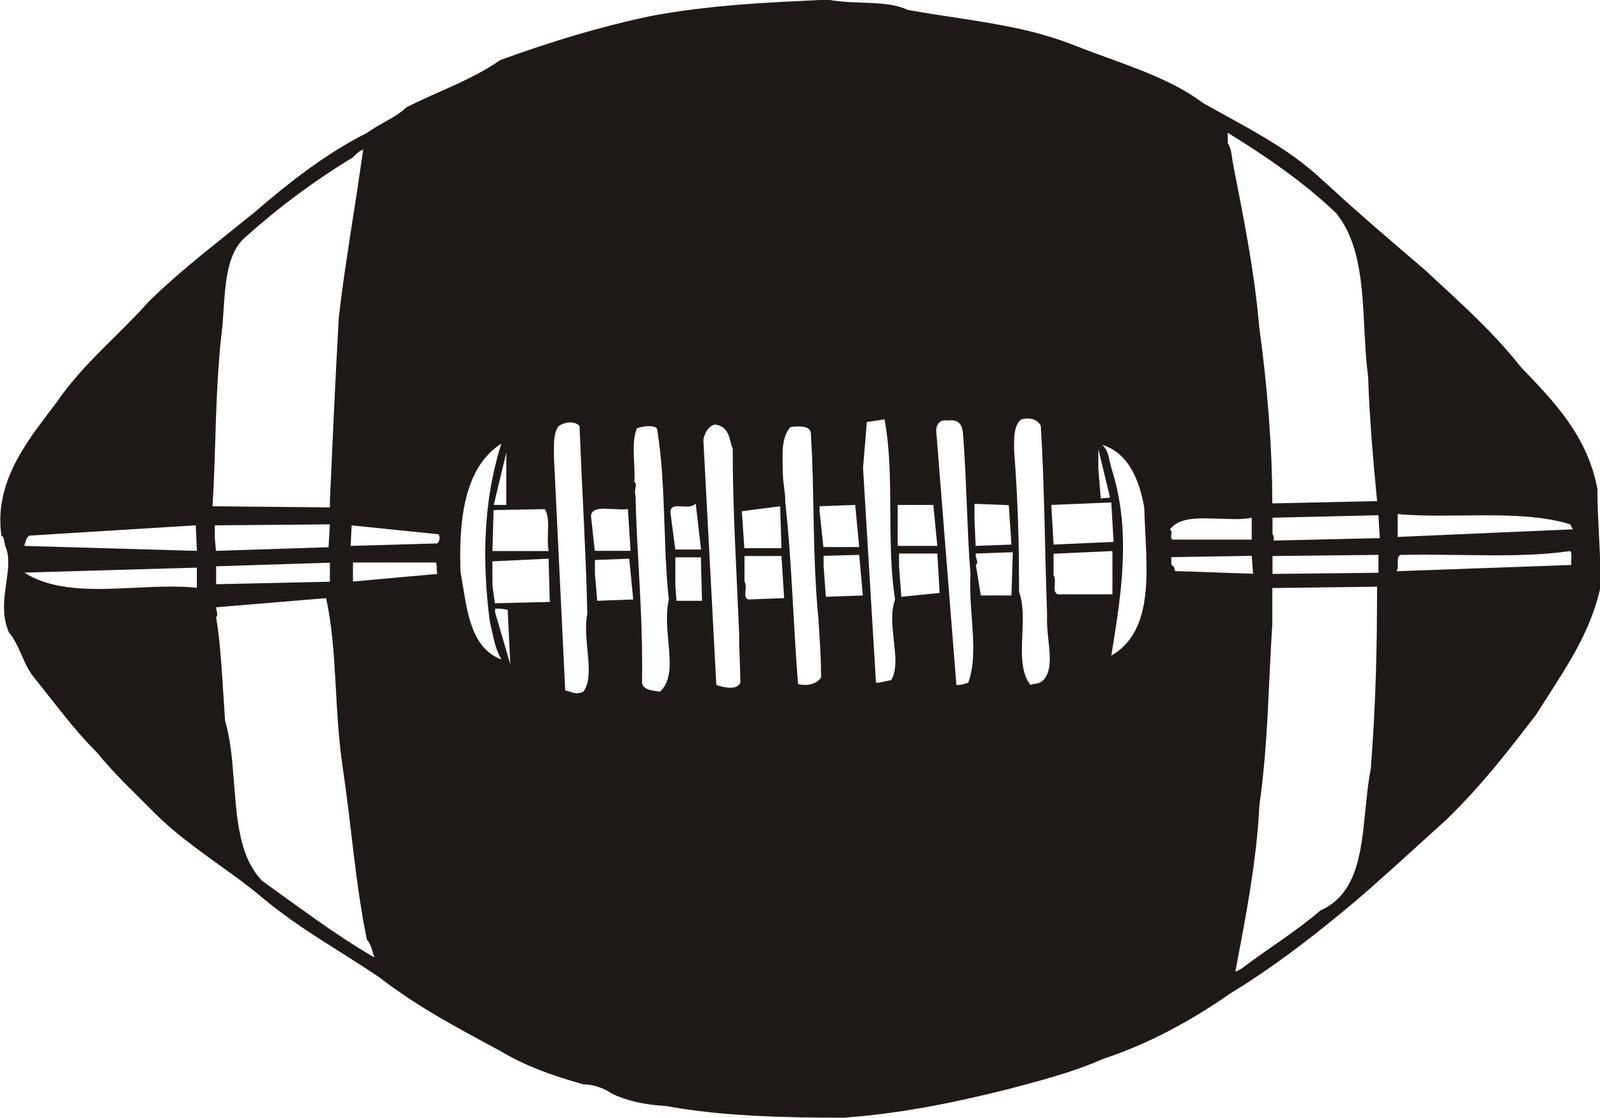 Free Football Vector Cliparts, Download Free Clip Art, Free